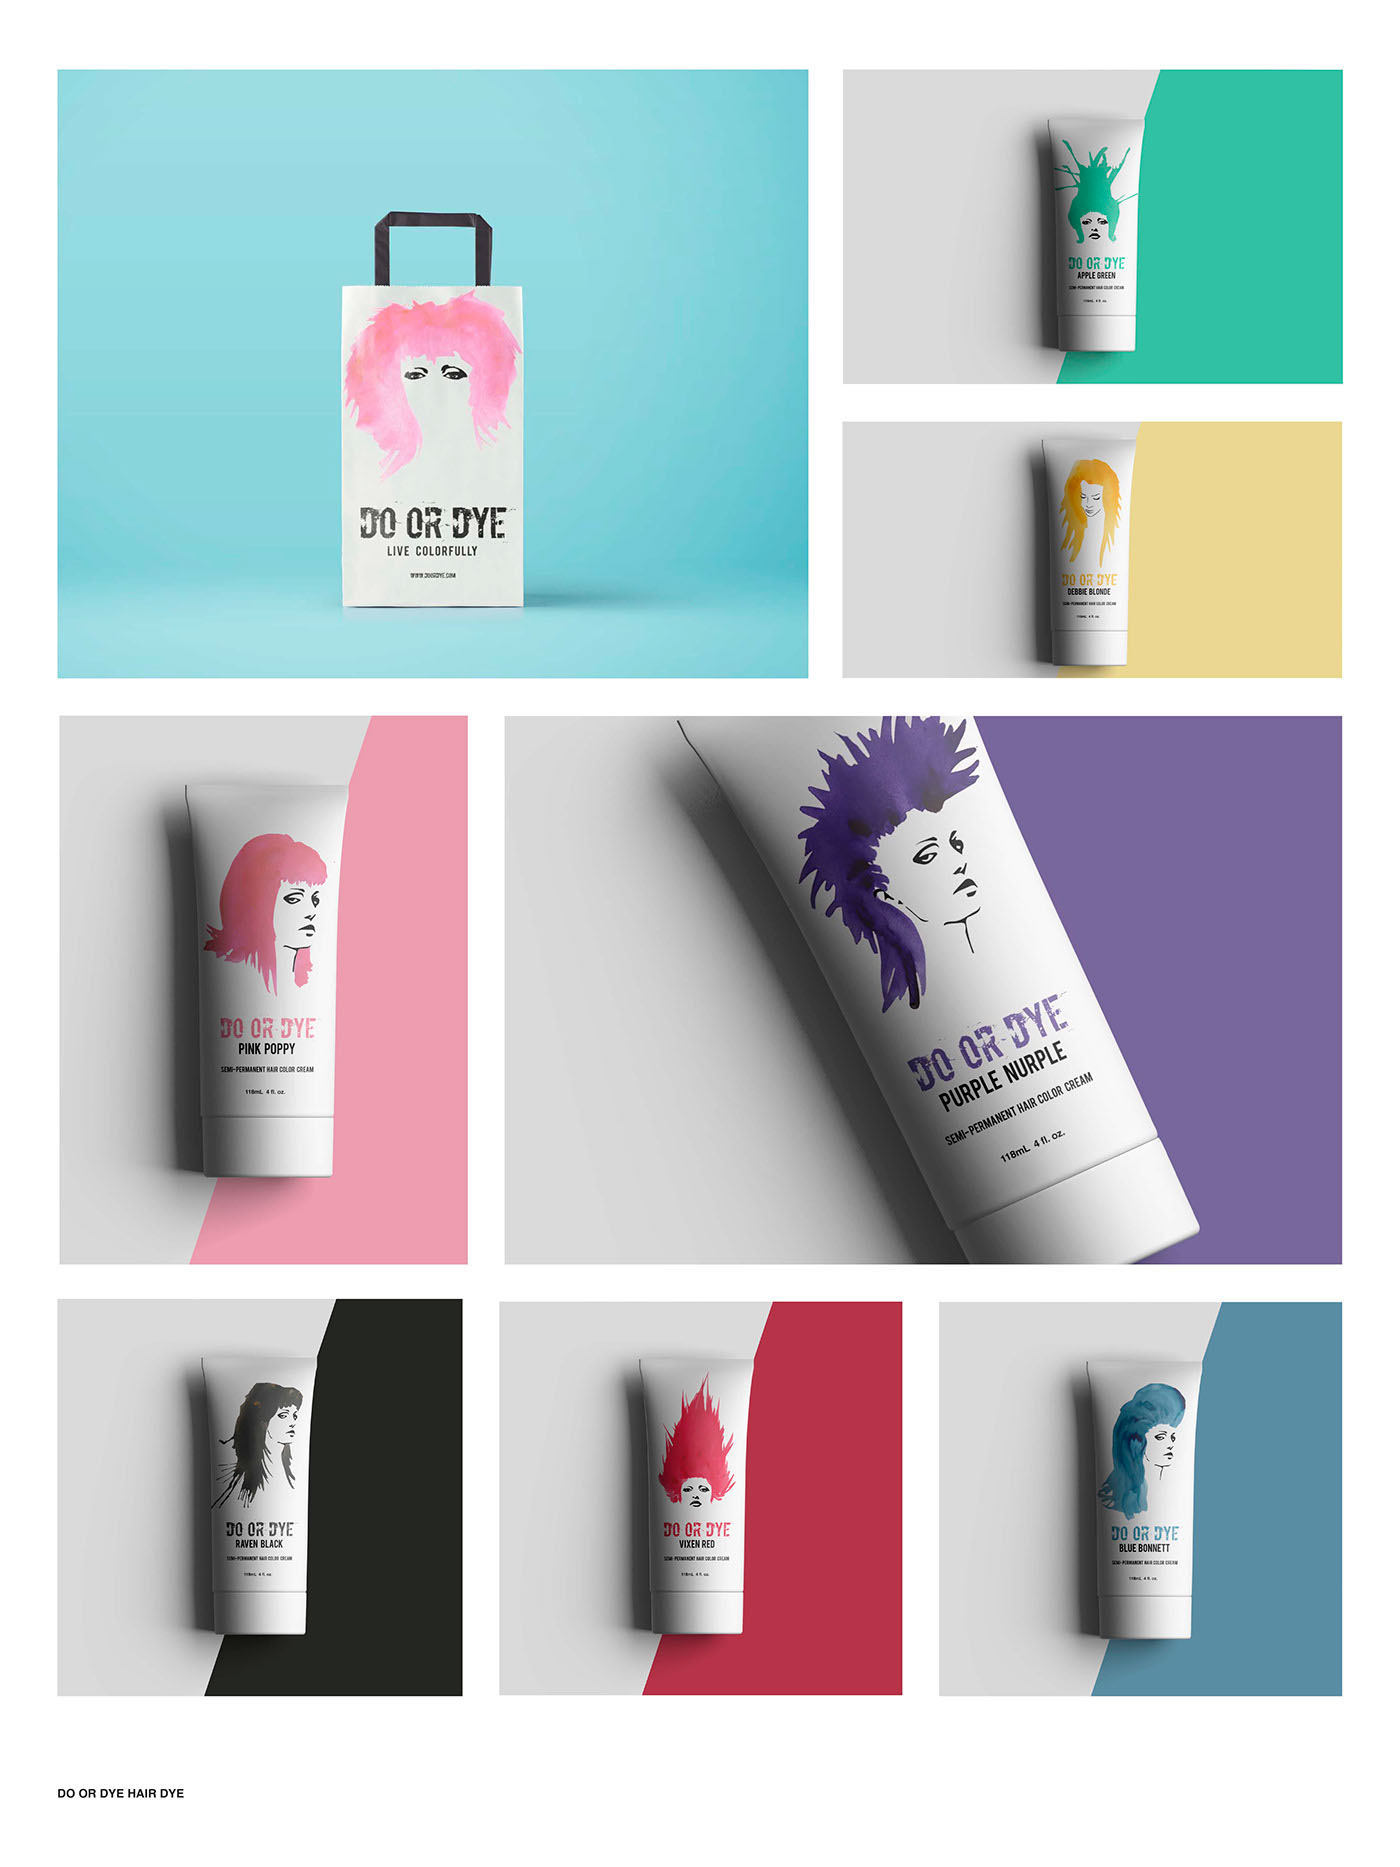 hair dye dye hair color package Experience idea ADDY funky product